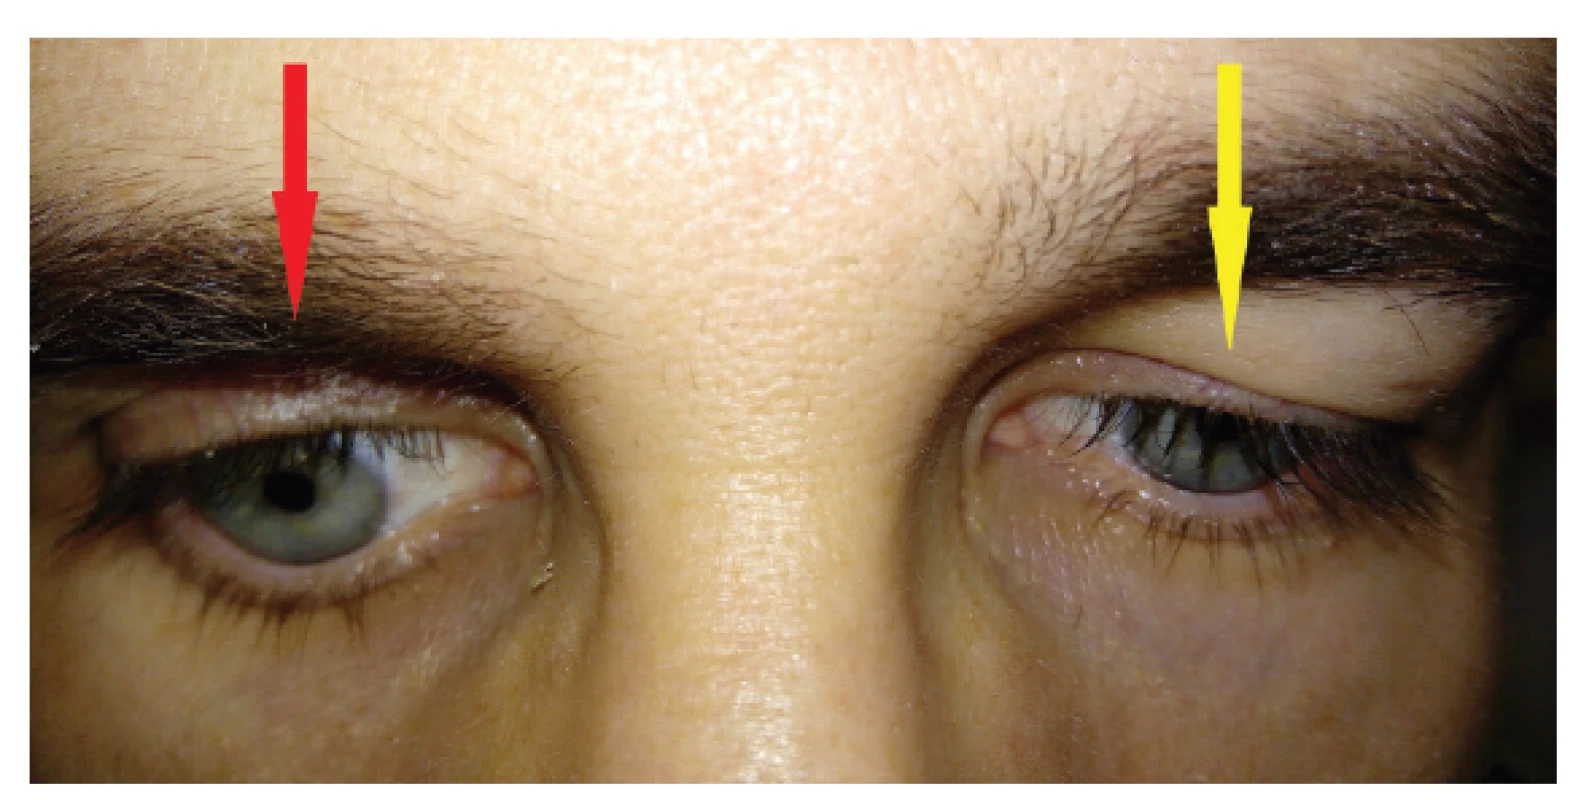 Retraction of the right upper eyelid with Graefe’s sign